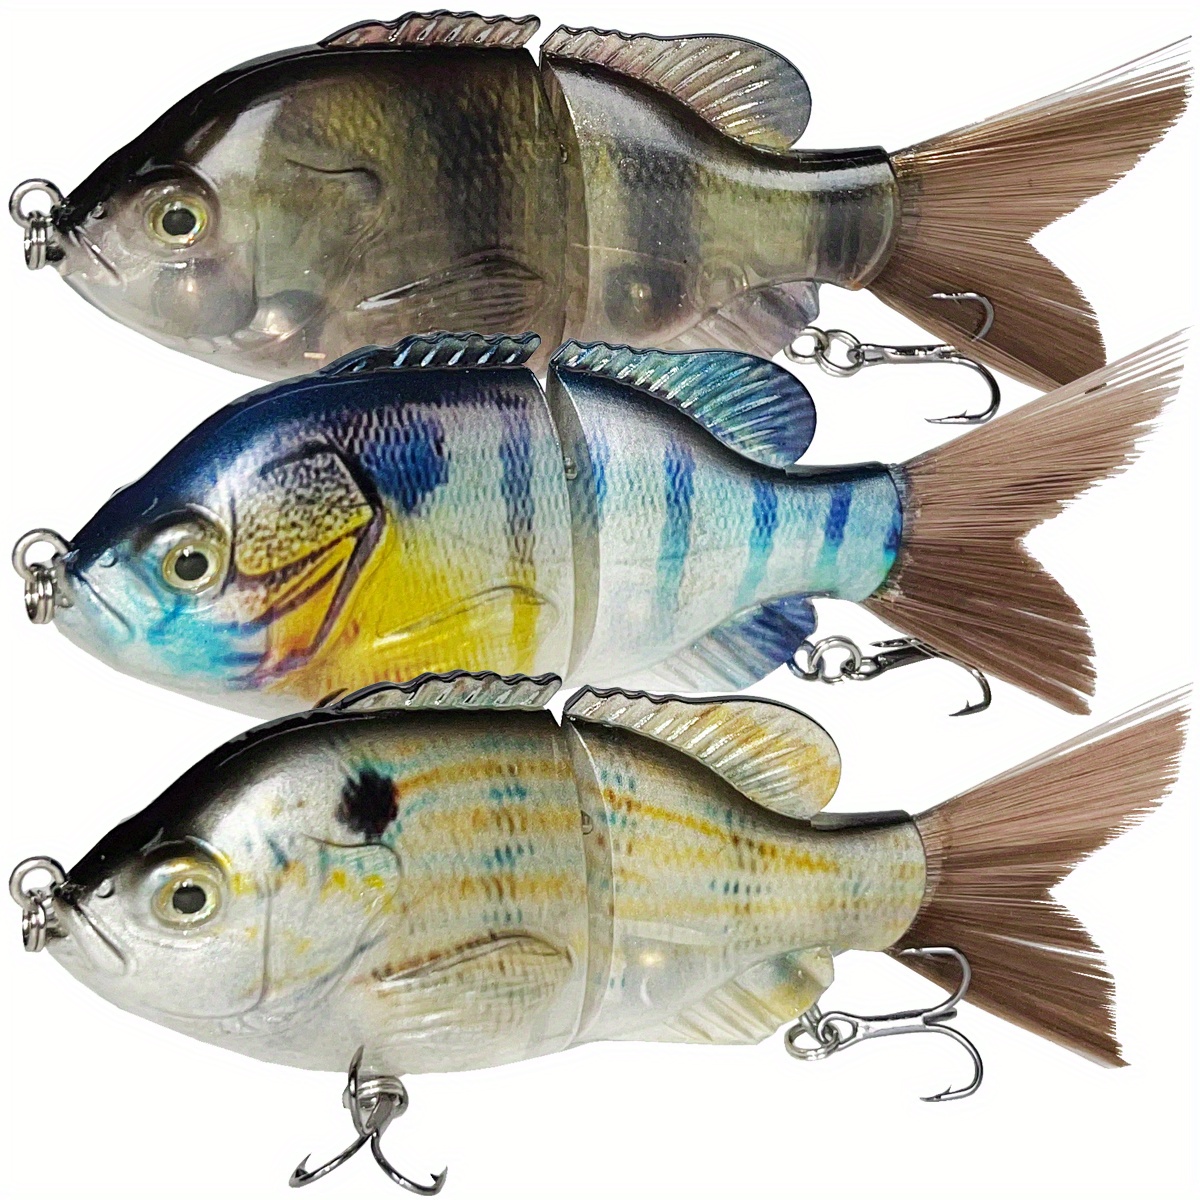 DaMiRa fishing lures for bass Robotic Swimming Lure Multi-Section